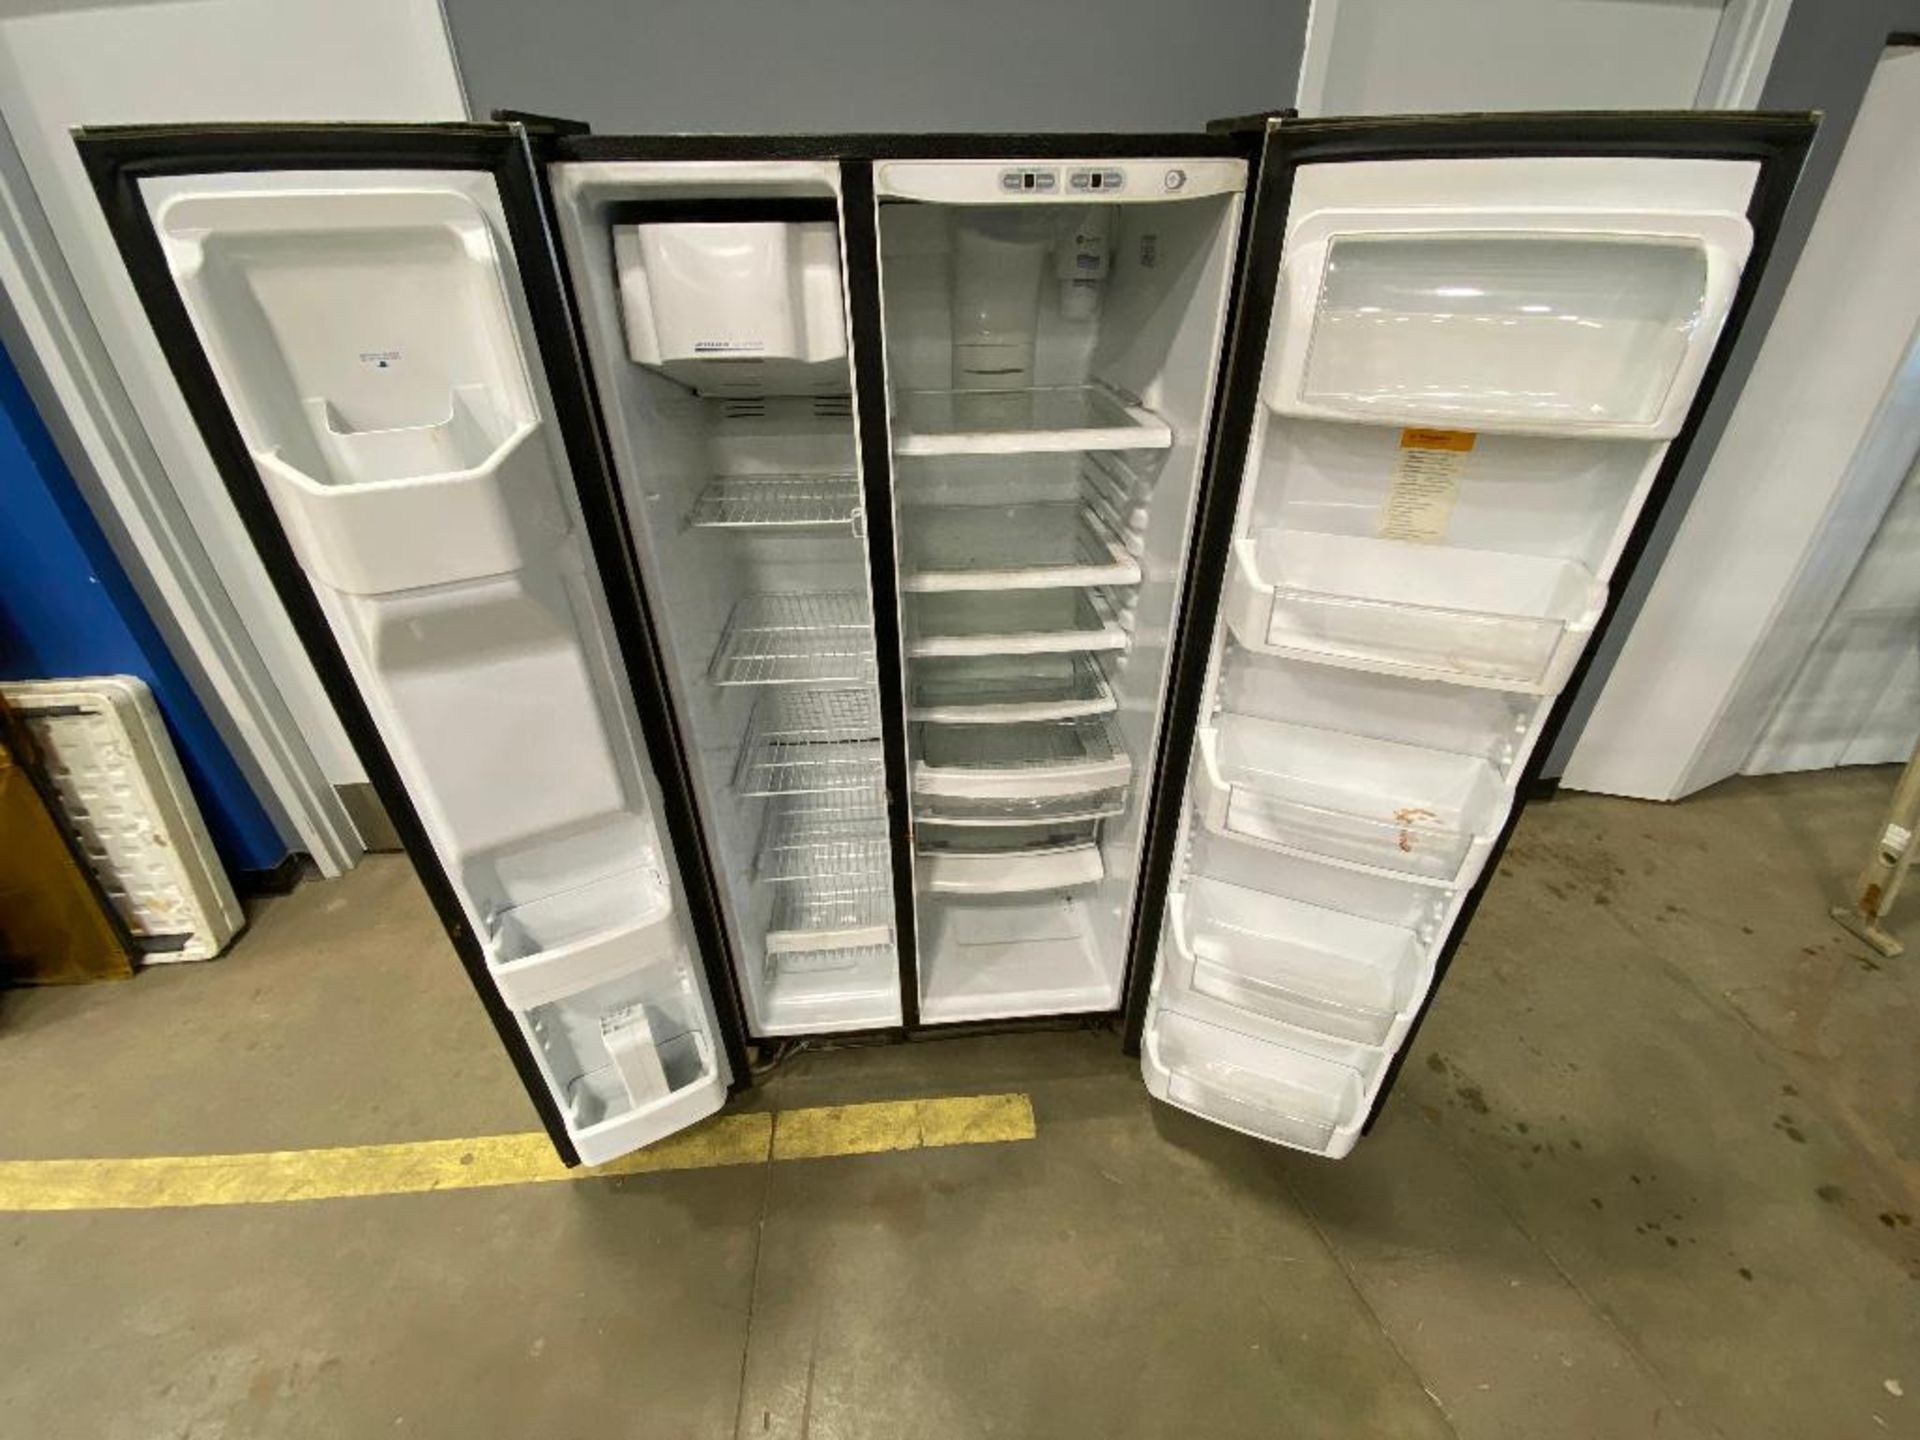 General Electric GSS25XSRC Refrigerator/ Freezer - Image 4 of 7